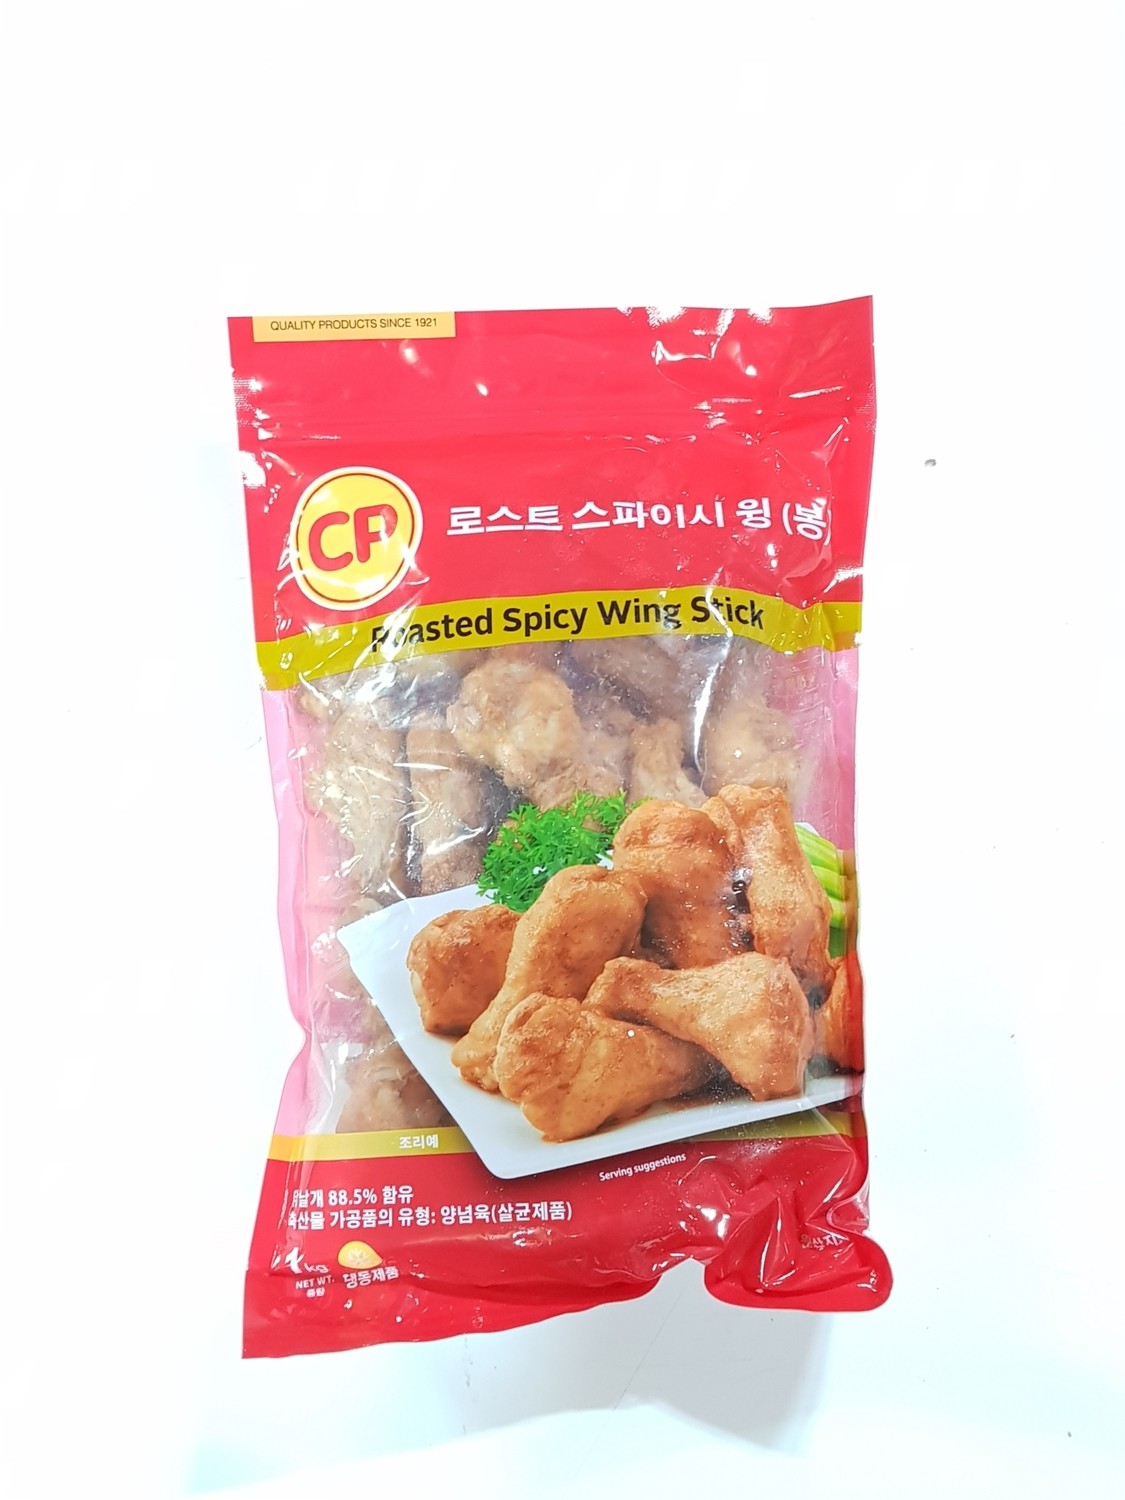 Ayam crispy Roasted Spicy Wing Stick (CP Halal 1Kg)